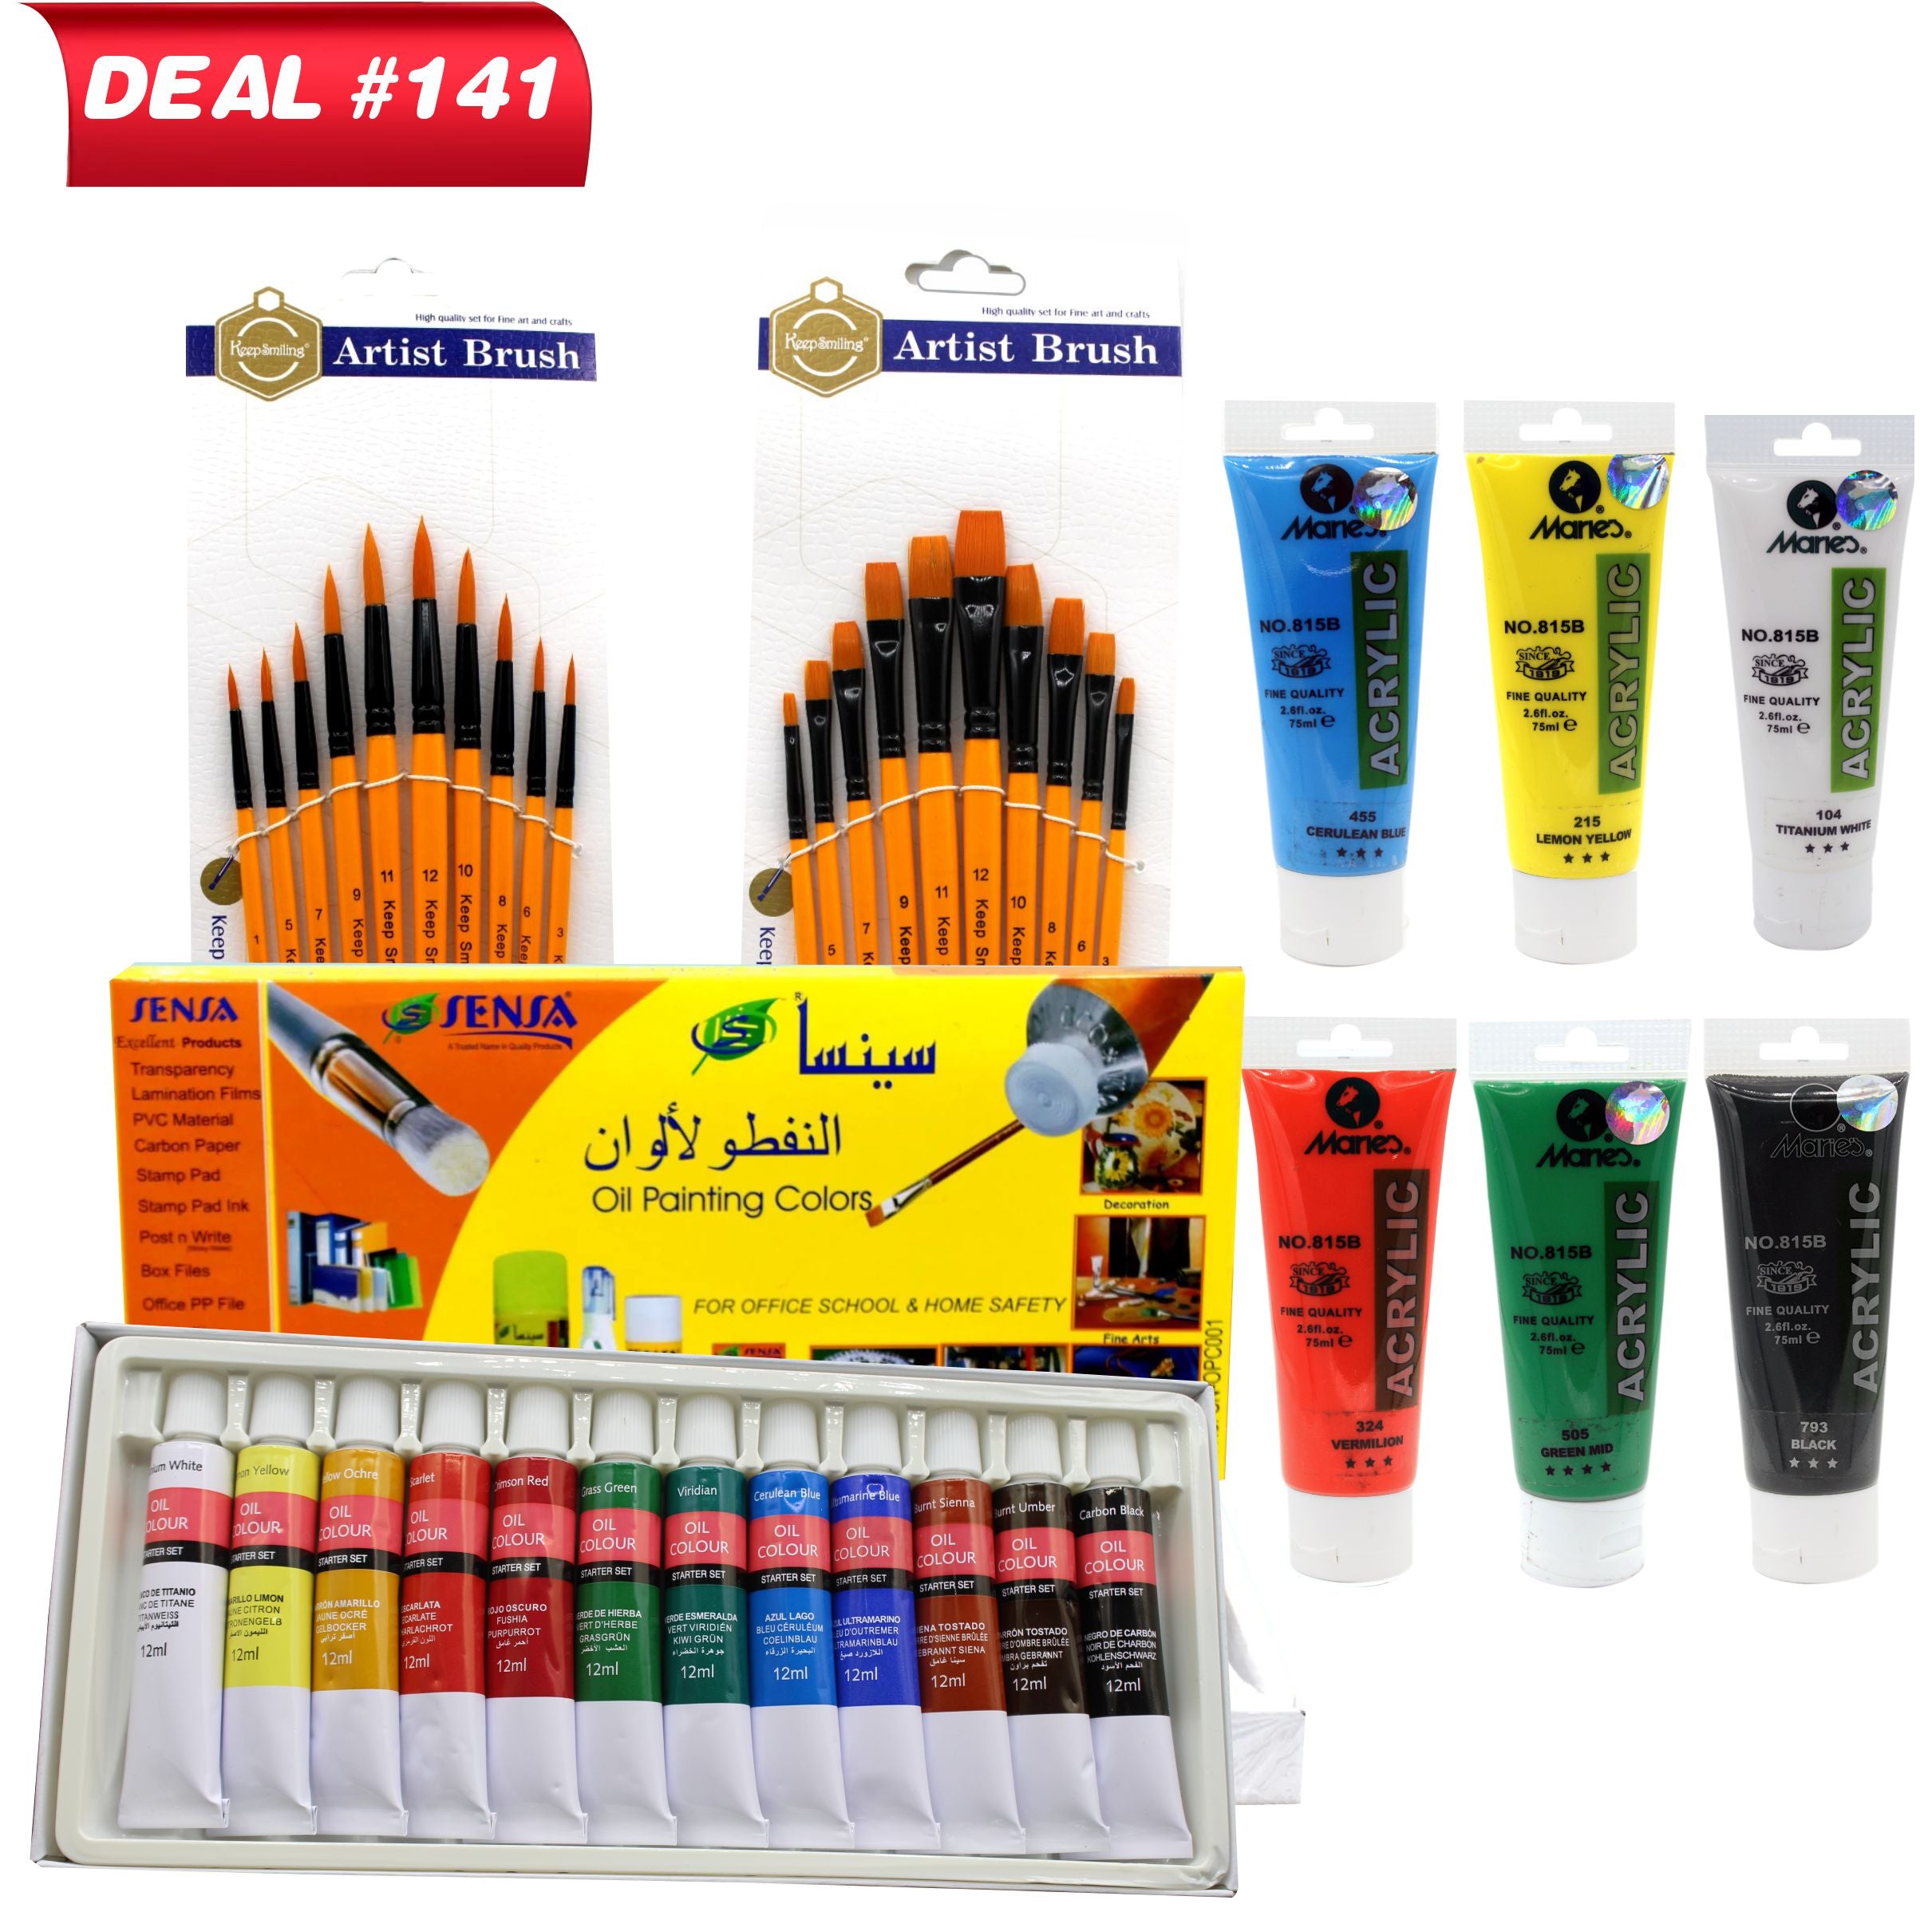 Oil & Acrylic Painting Kit For Artist, Deal No.141